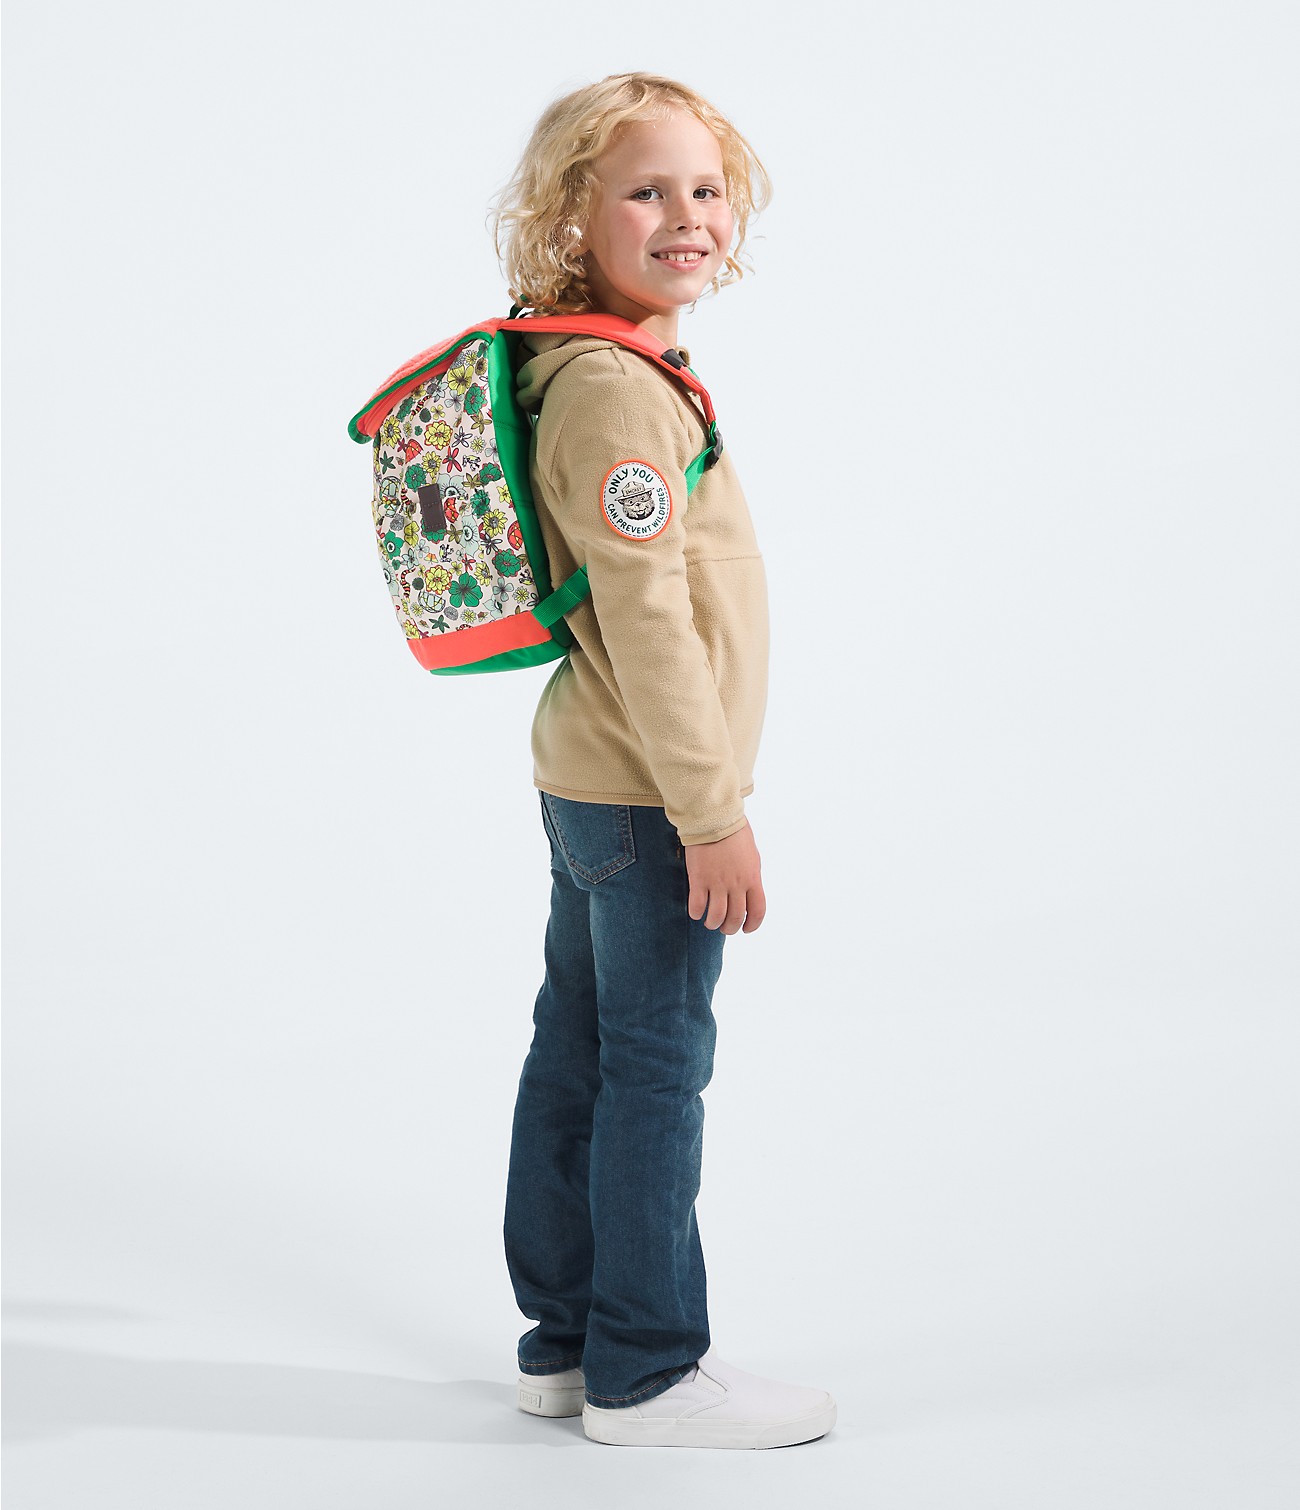 Youth Mini Explorer Backpack | The North Face